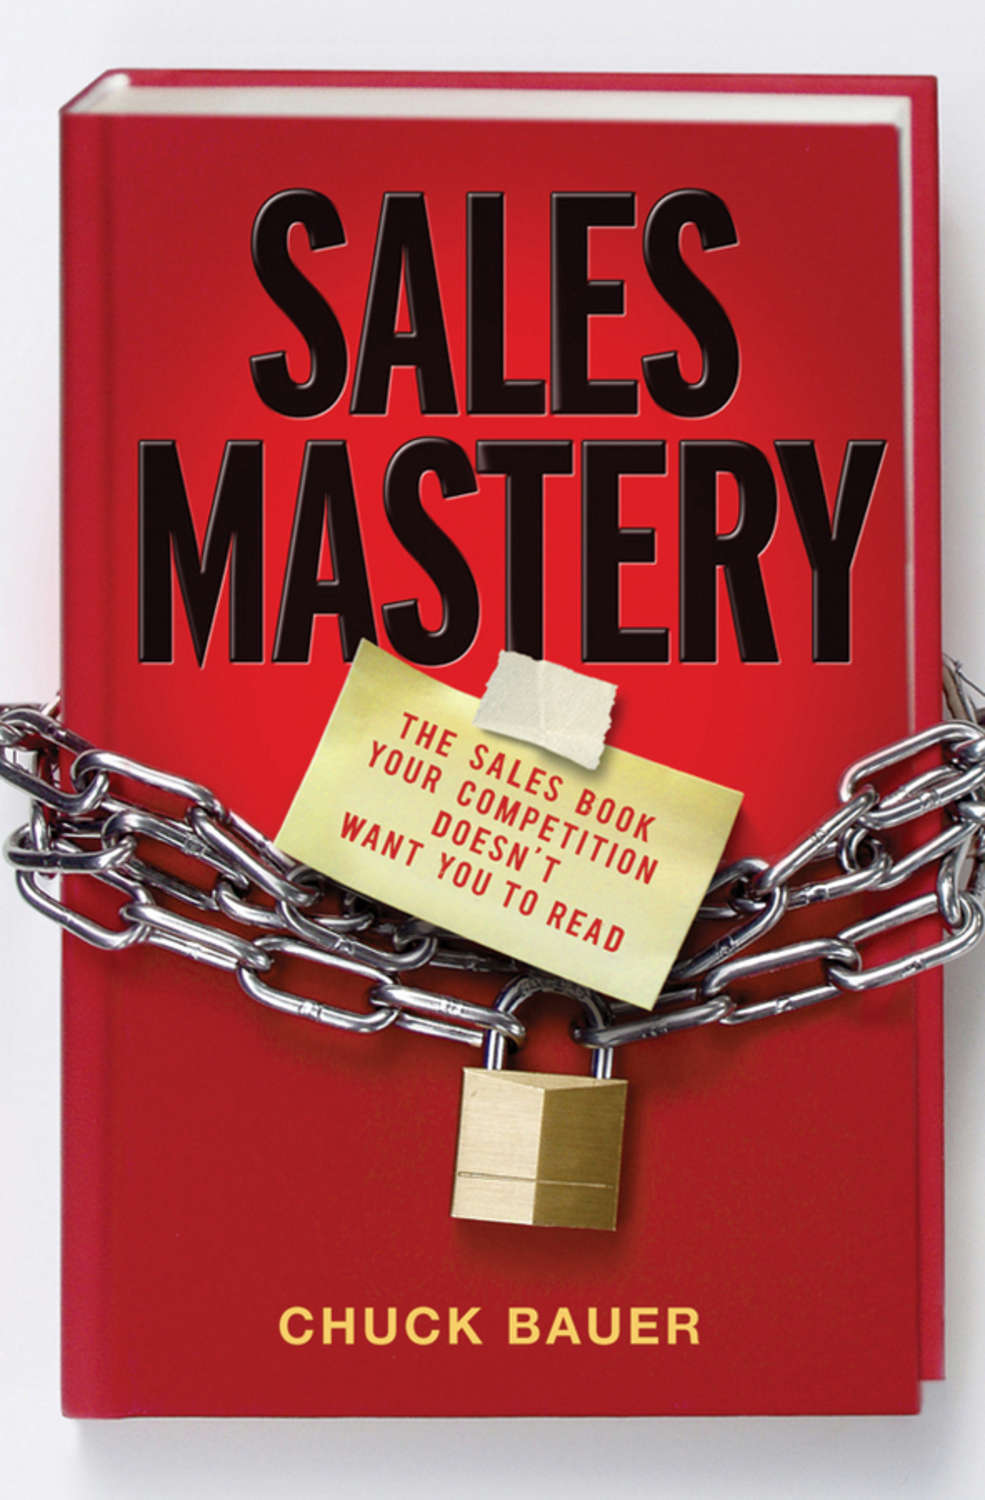 Sales book. Mastery книга. The sales book. Sale. In sales.